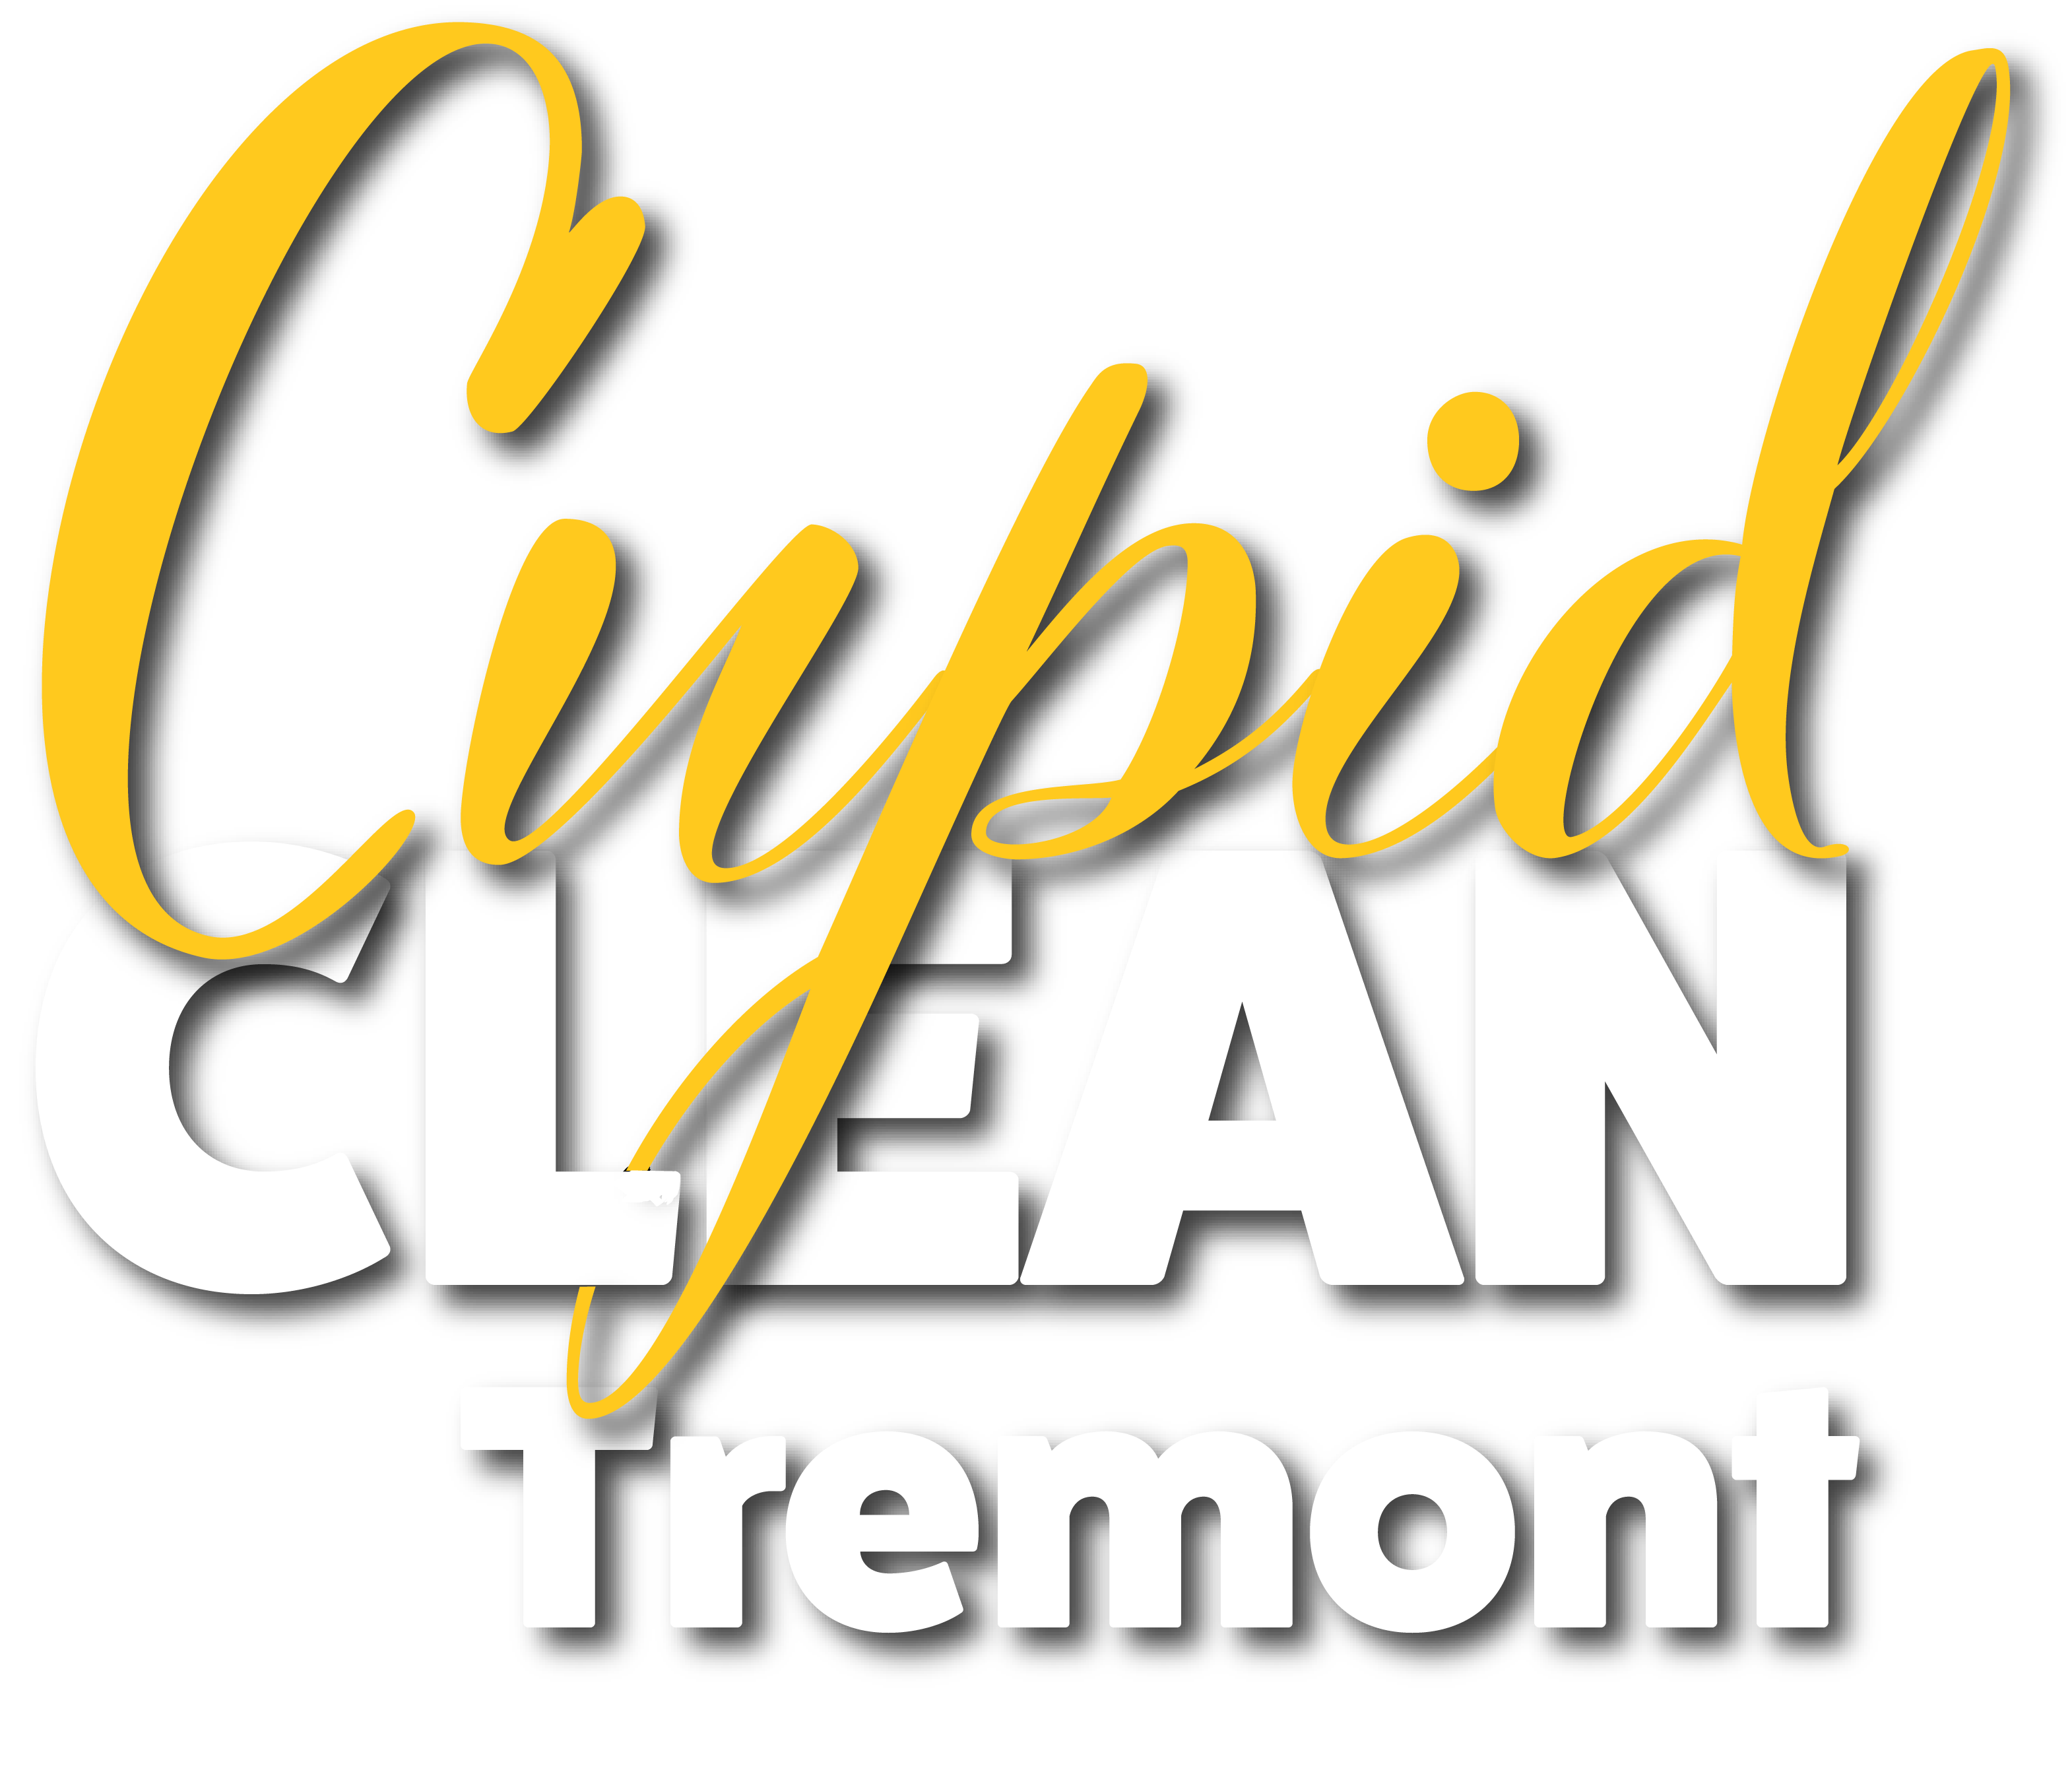 house cleaning tremont